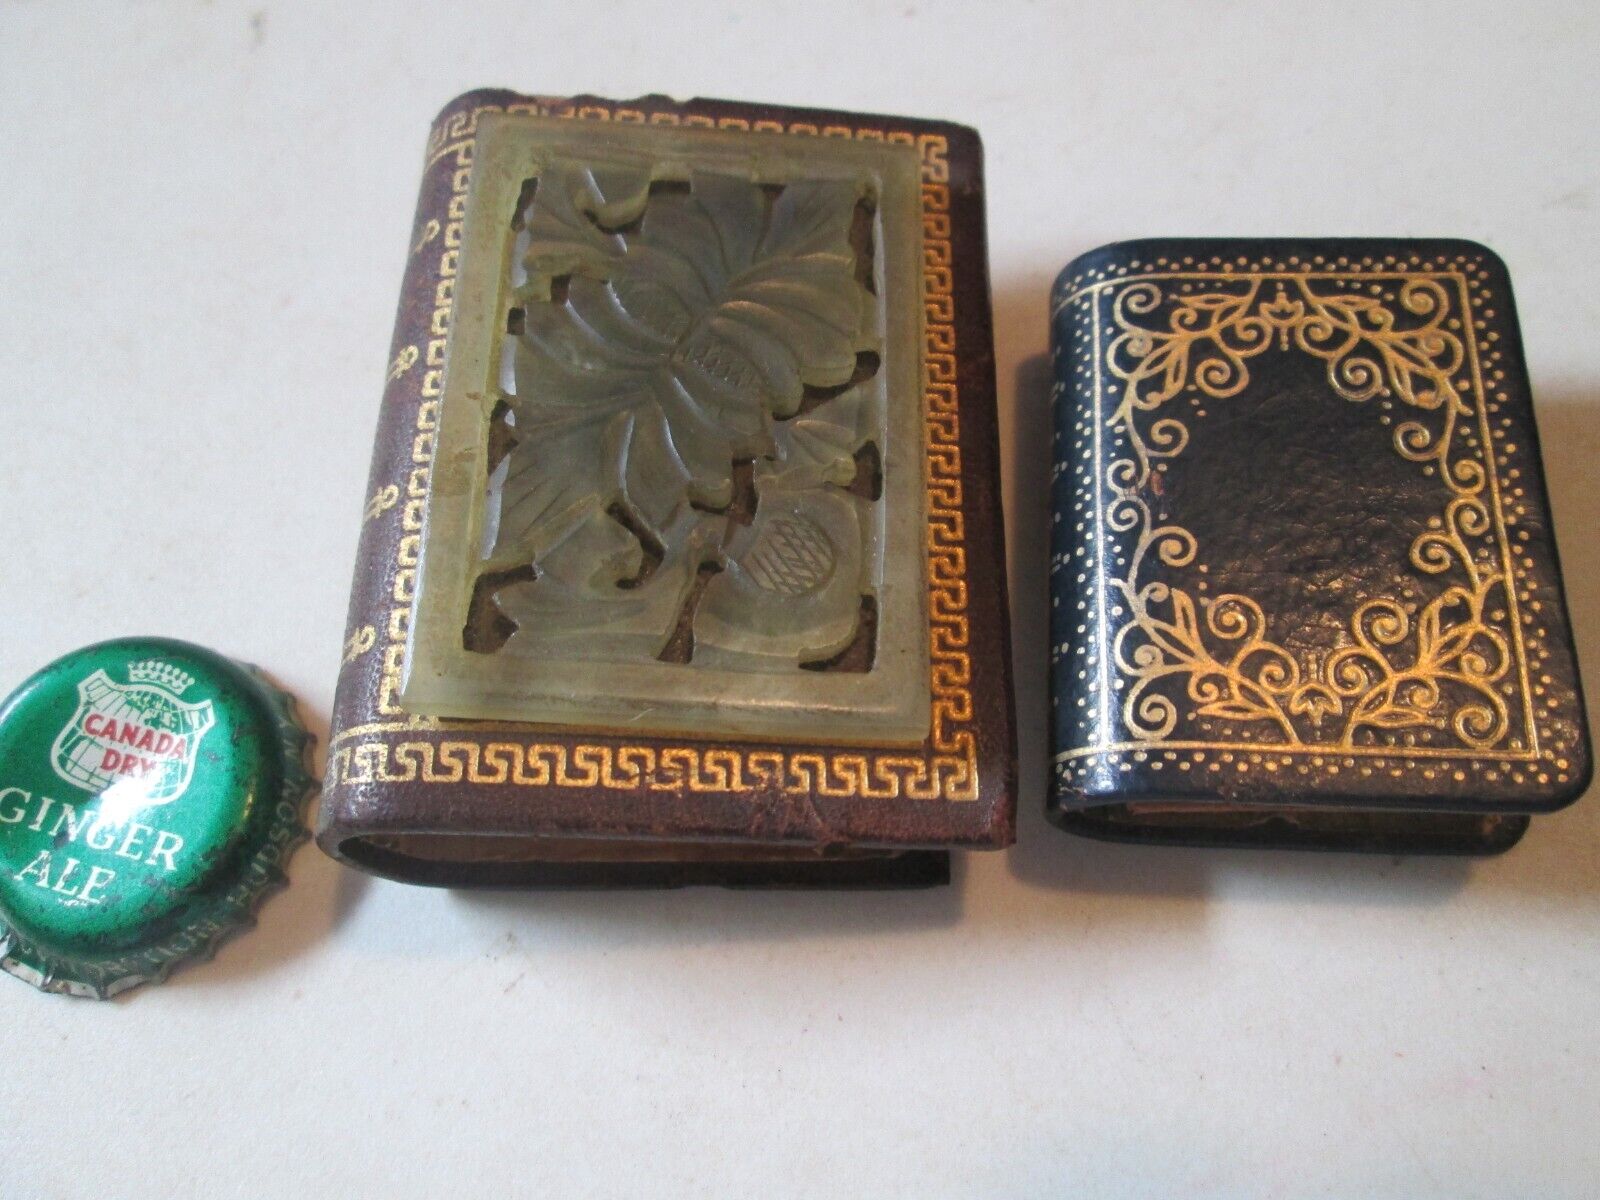 2 Vintage Pocket Purse Match Box Holder Cover Ornate THAT LOOKS LIKE SMALL BOOKS